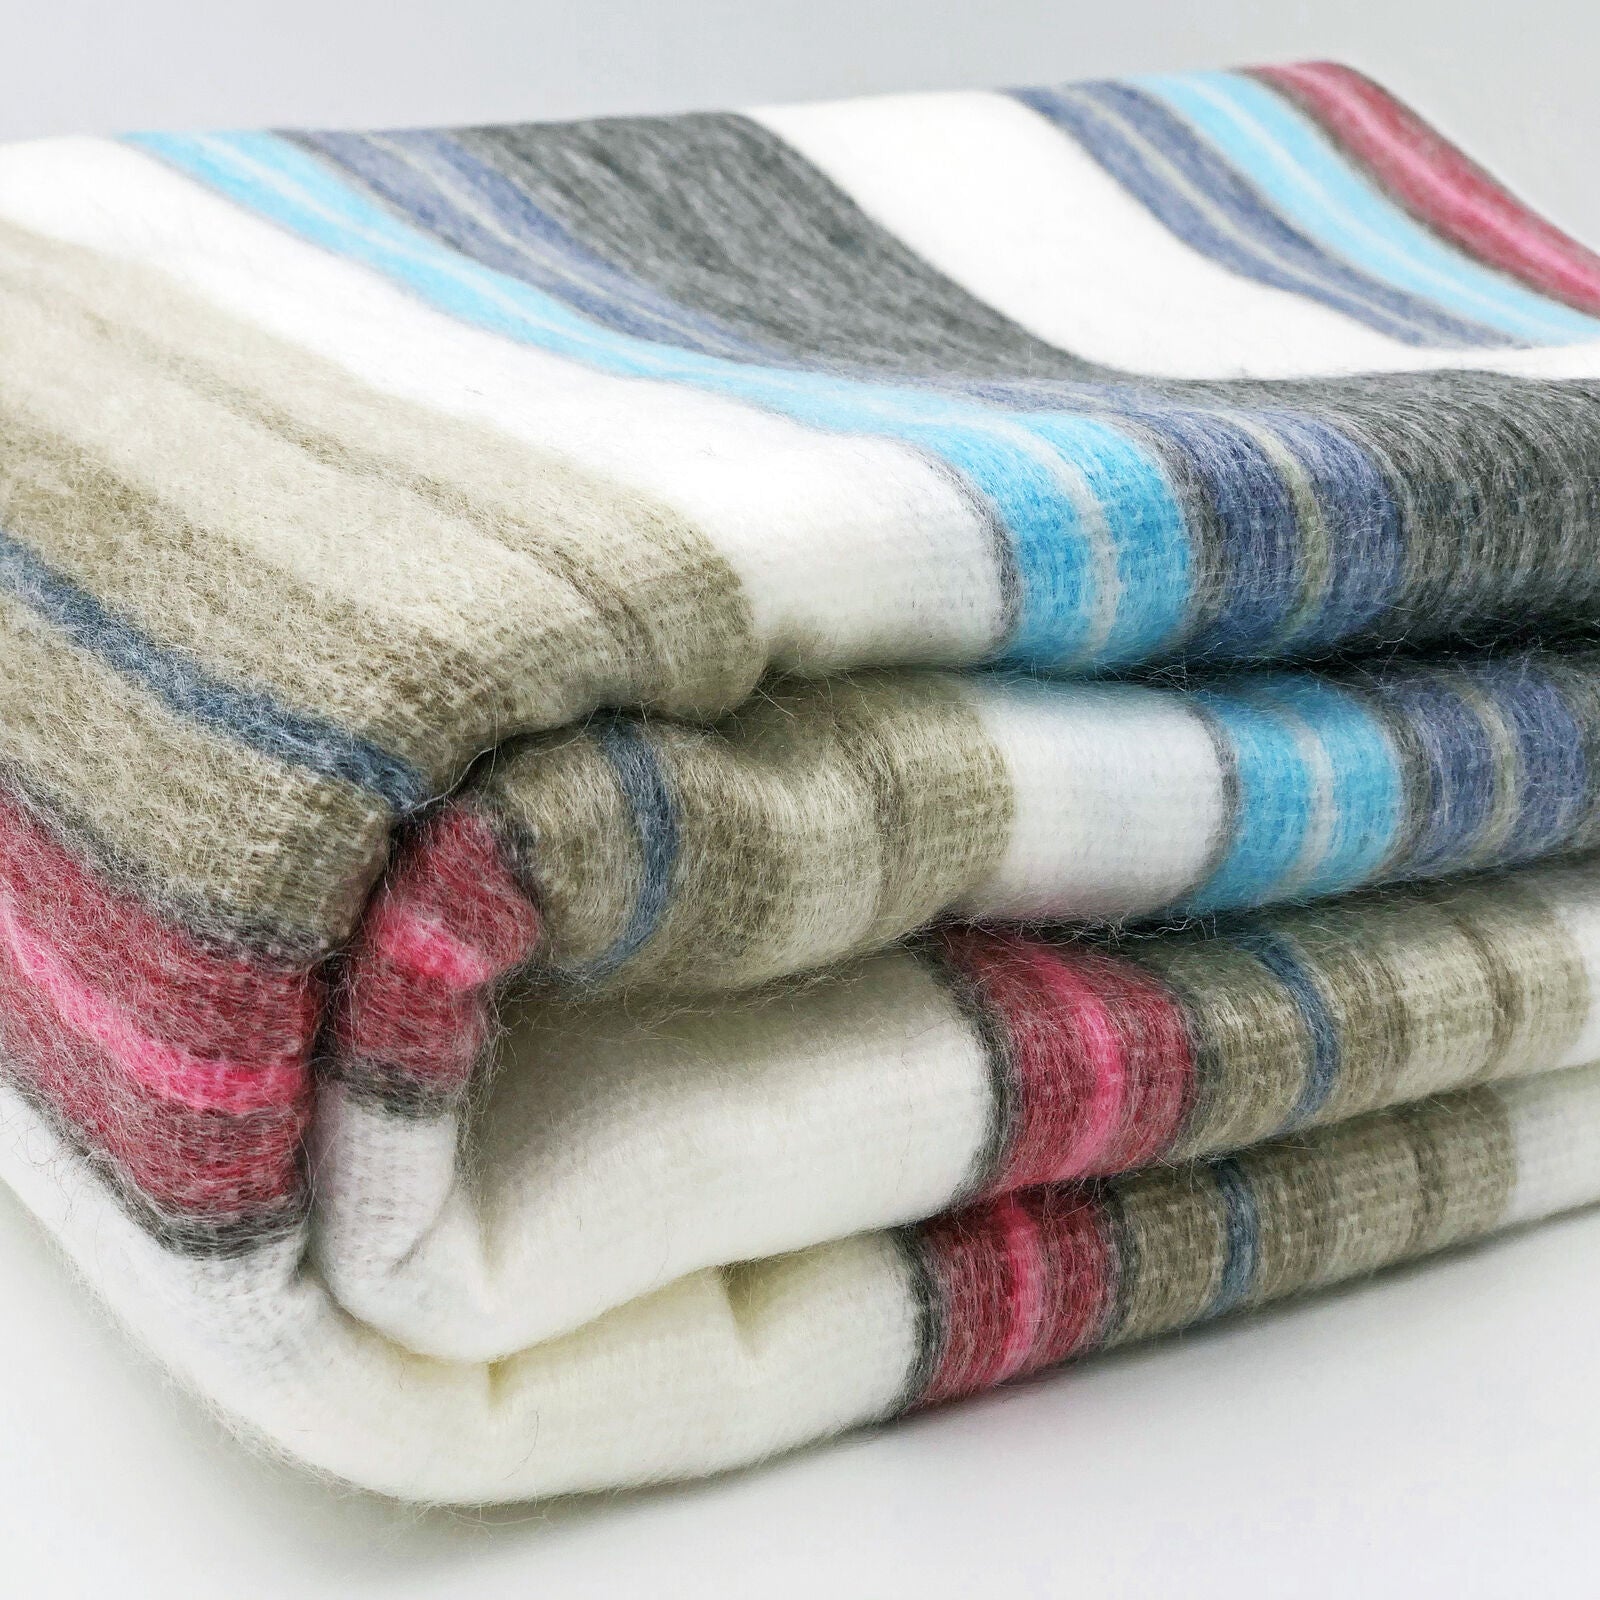 Carihuairazo - Baby Alpaca Wool Throw Blanket / Sofa Cover - Queen 90" x 63" - multi colored thin stripes pattern